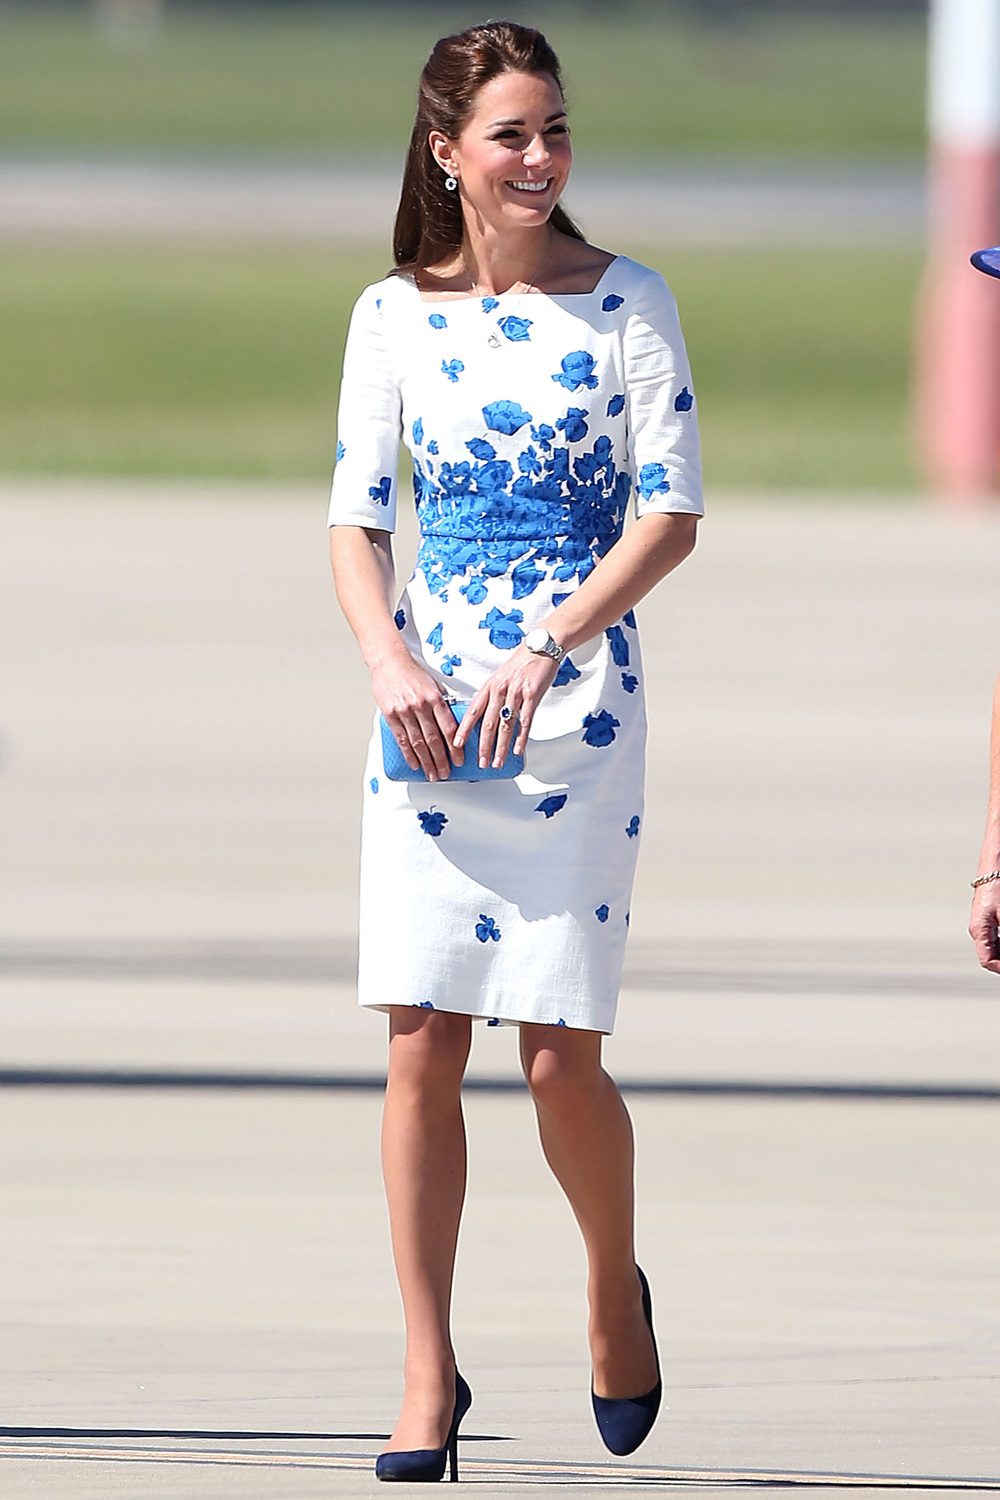 hbz-kate-middleton-style-gettyimages-485570993.jpg